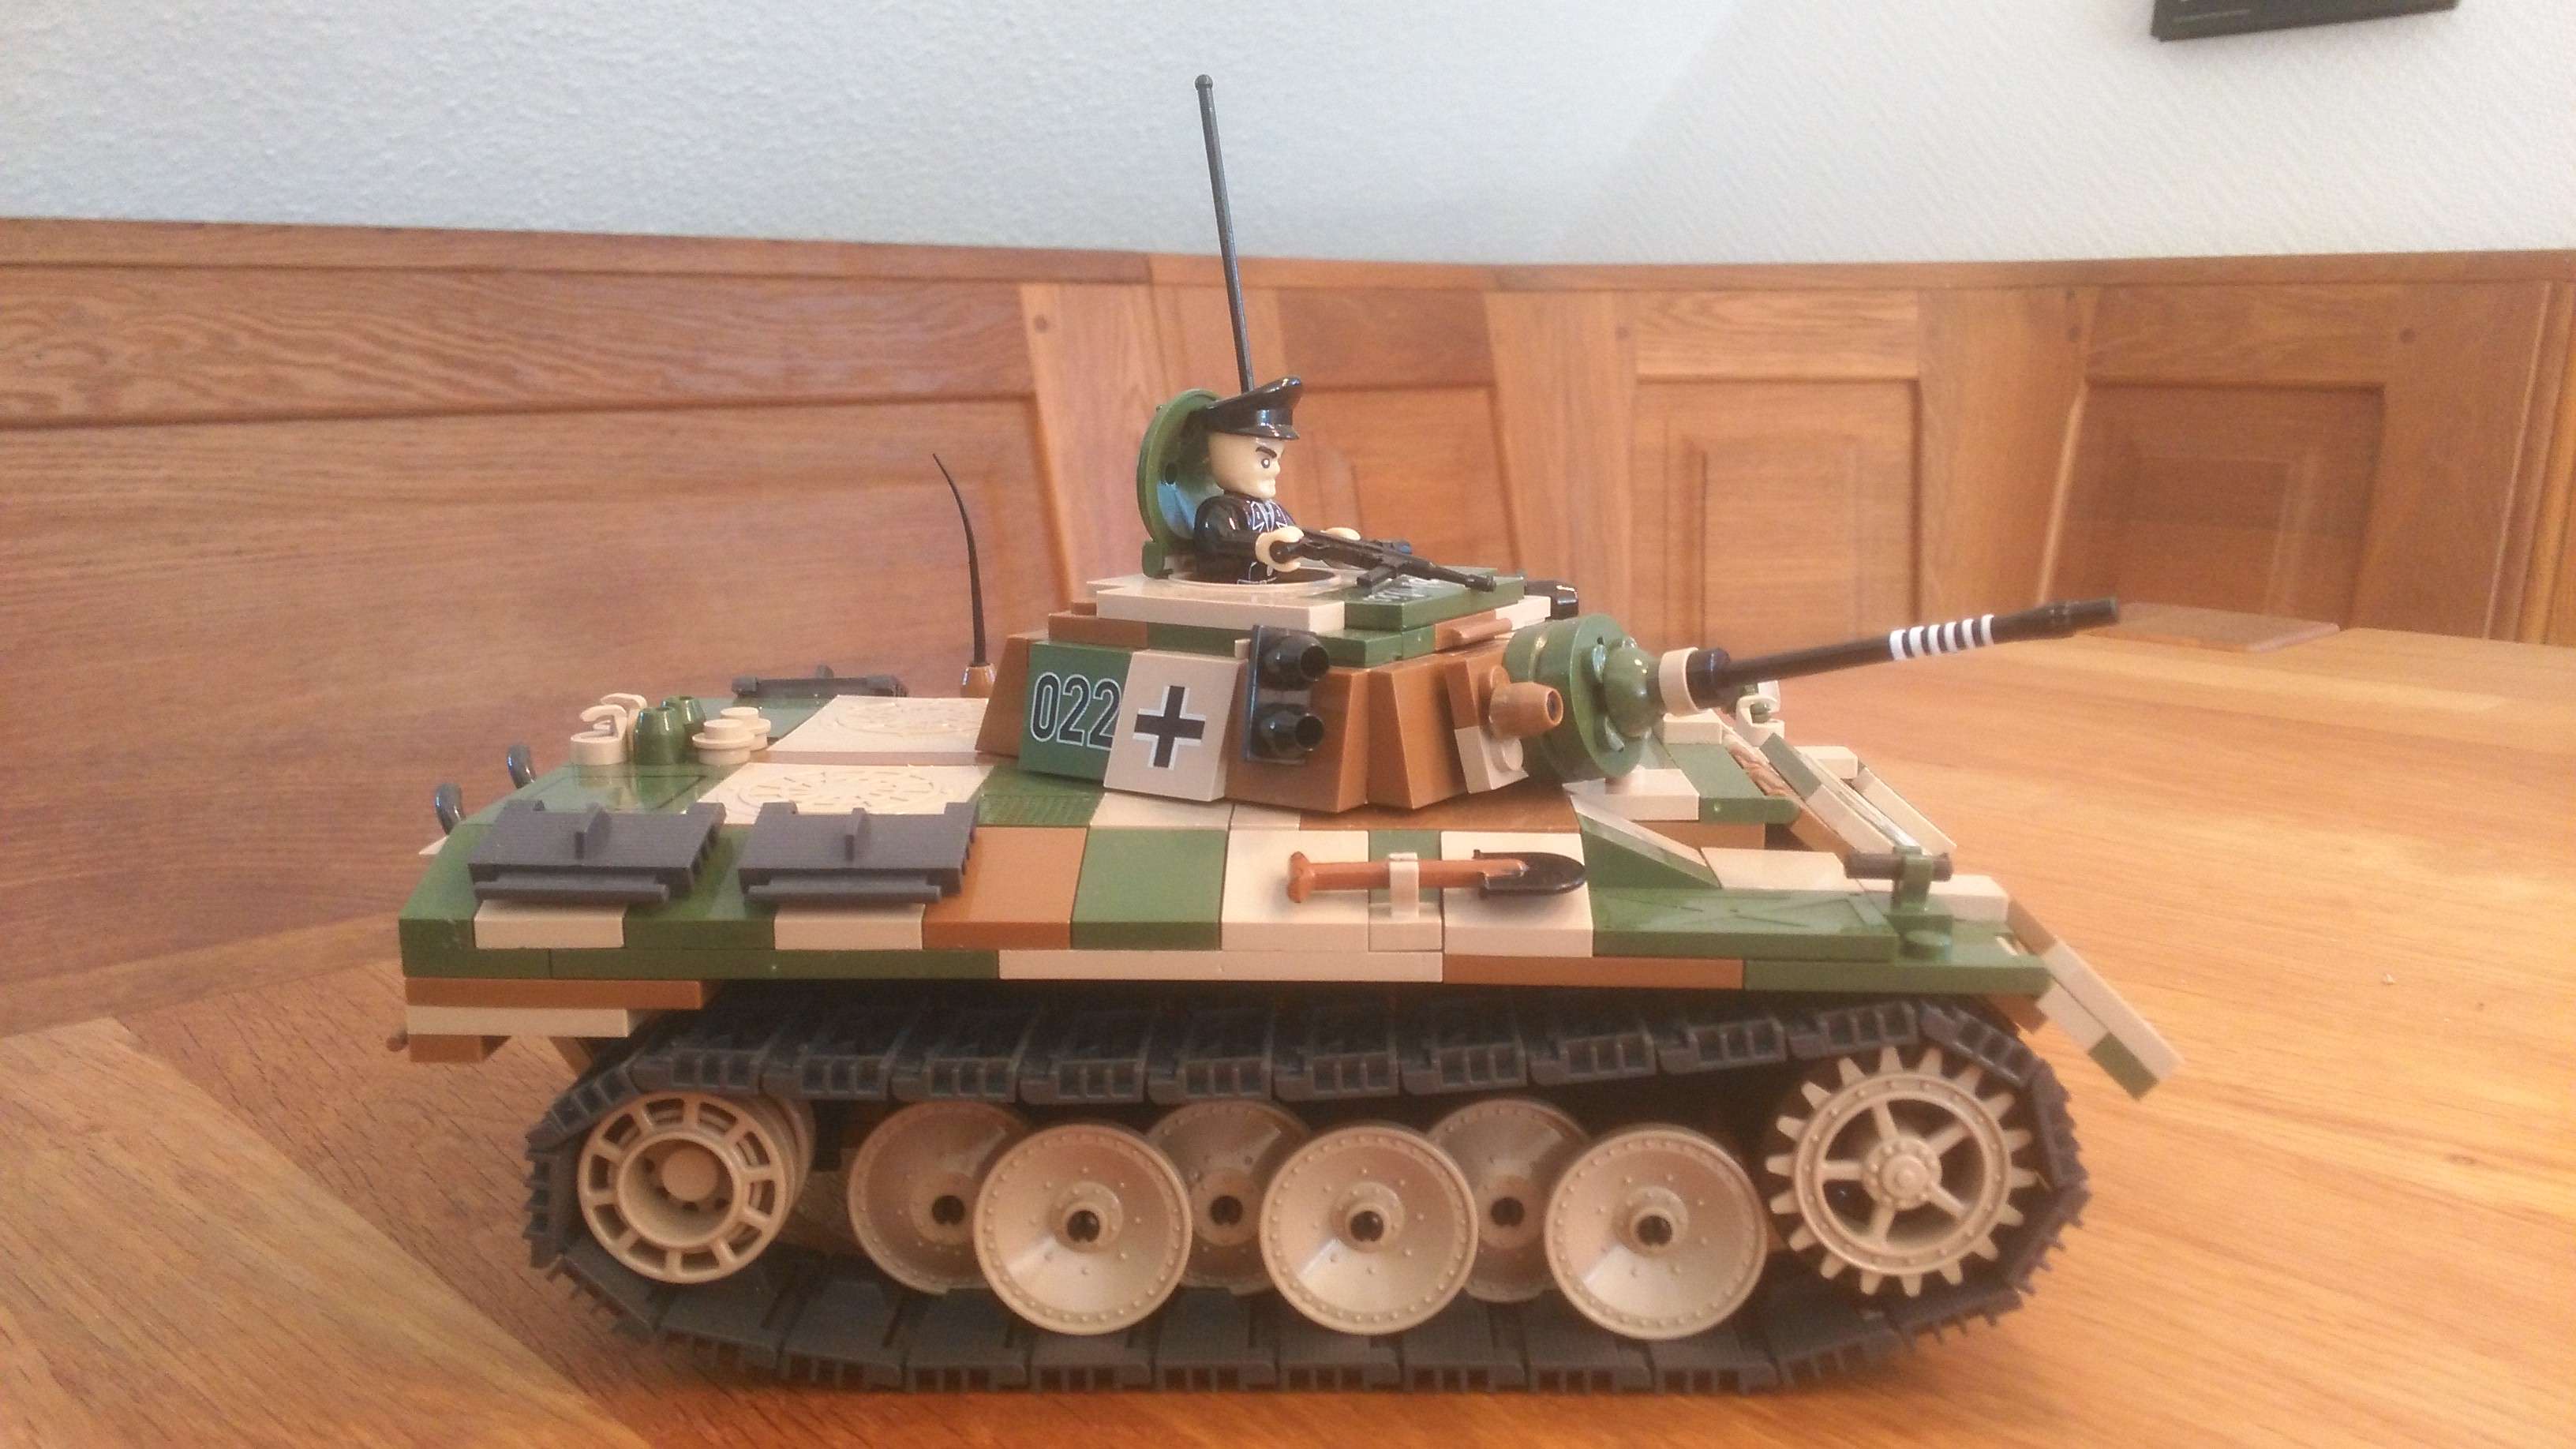 Cobi Small Army and Historical Collection 2018 | The Bloks Forum